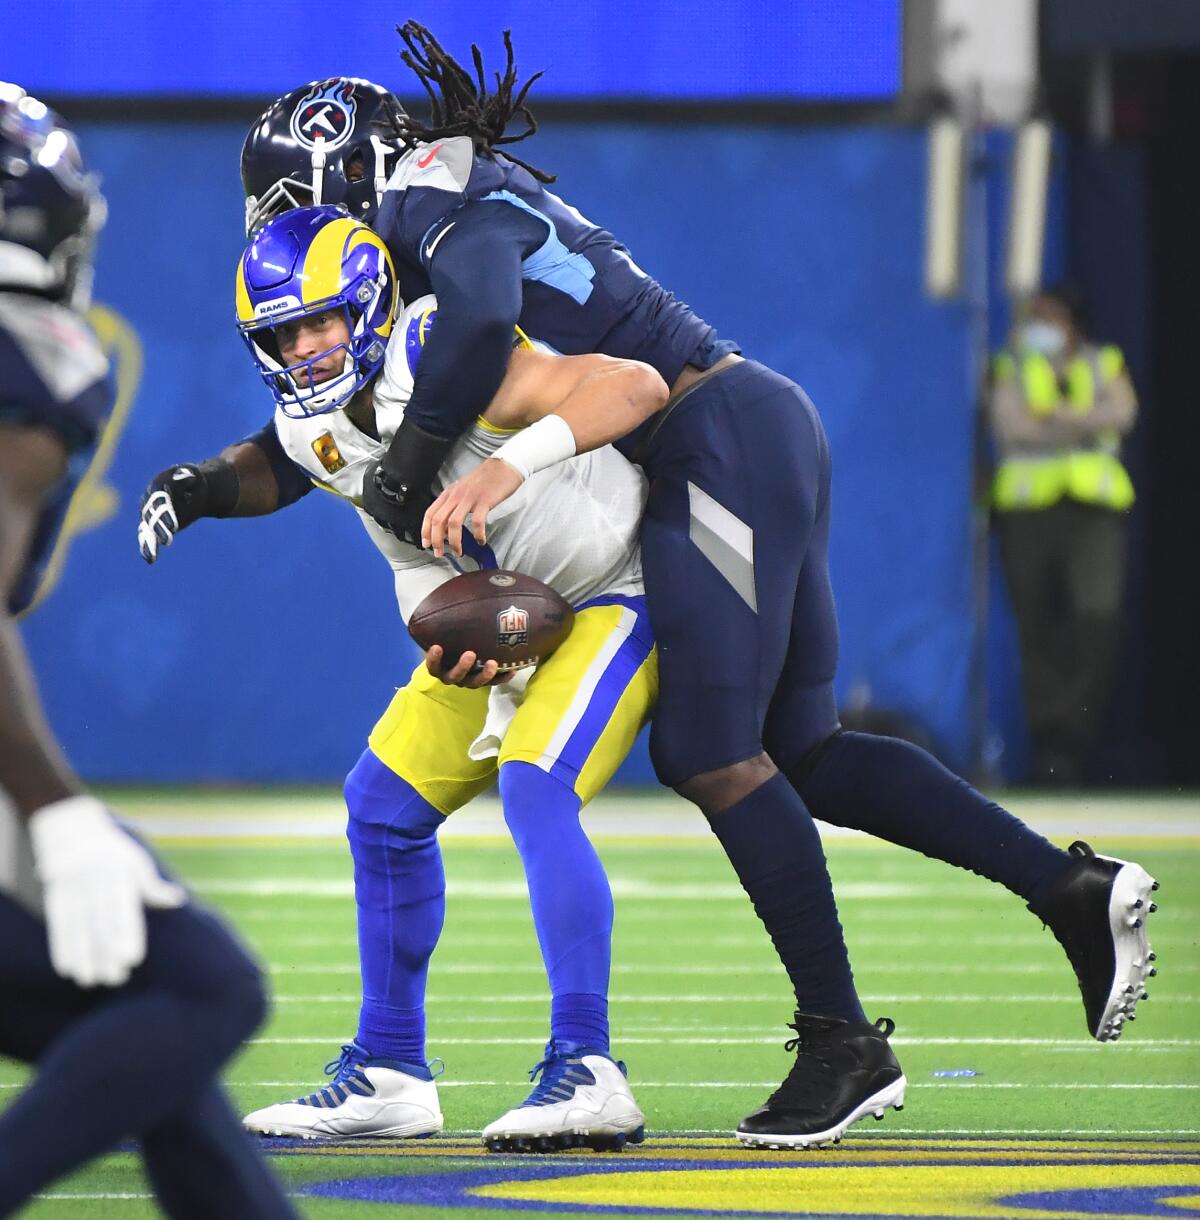 Rams quarterback Matthew Stafford is sacked by Titans Denico Autry in the first quarter.